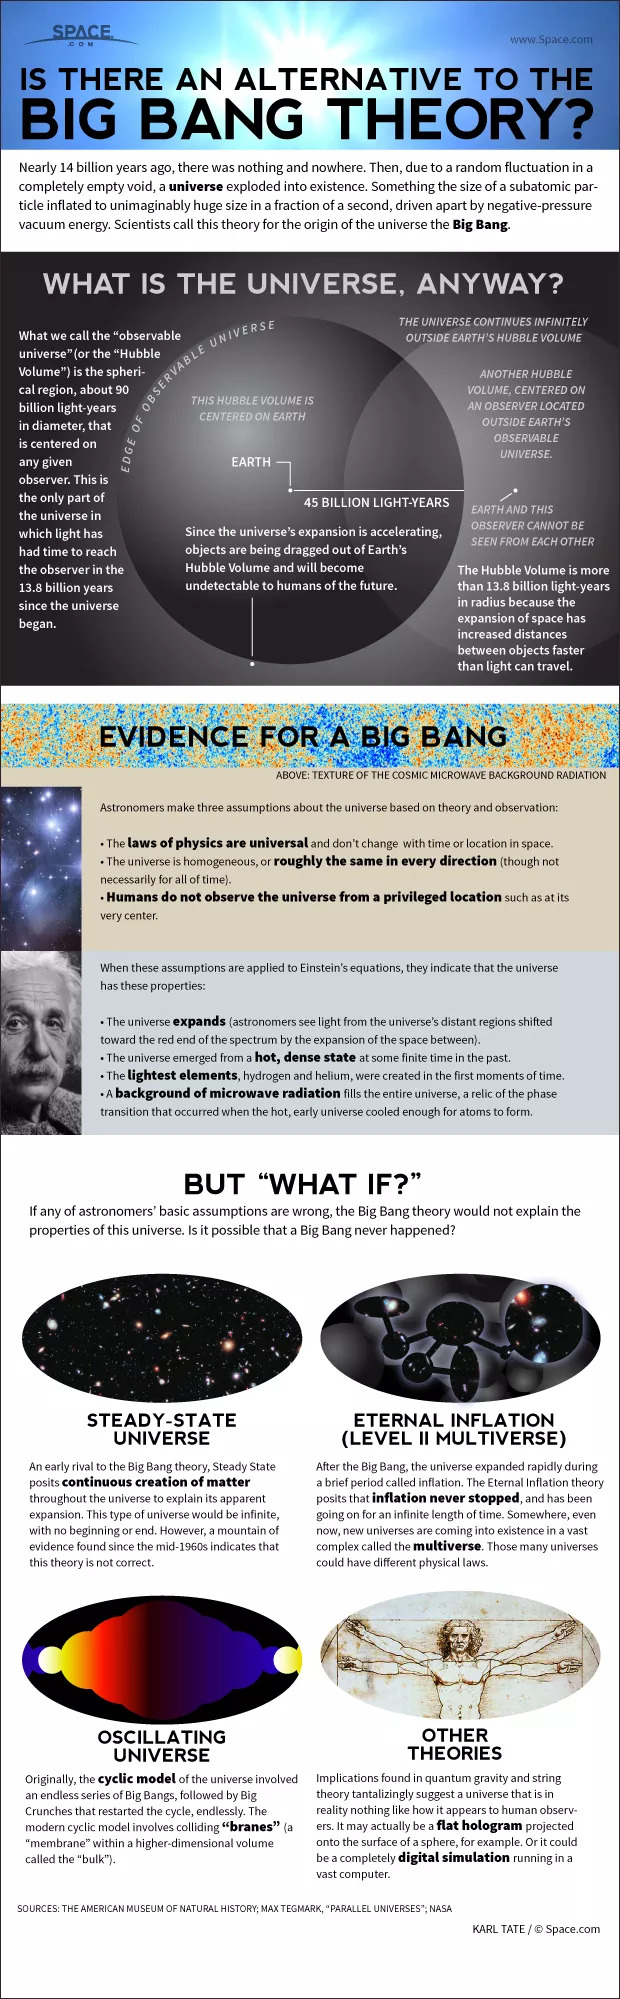 Most astronomers believe the universe began 13.8 billion years ago in an explosion called the Big Bang. Other theorists have invented alternatives and extensions to this theory.